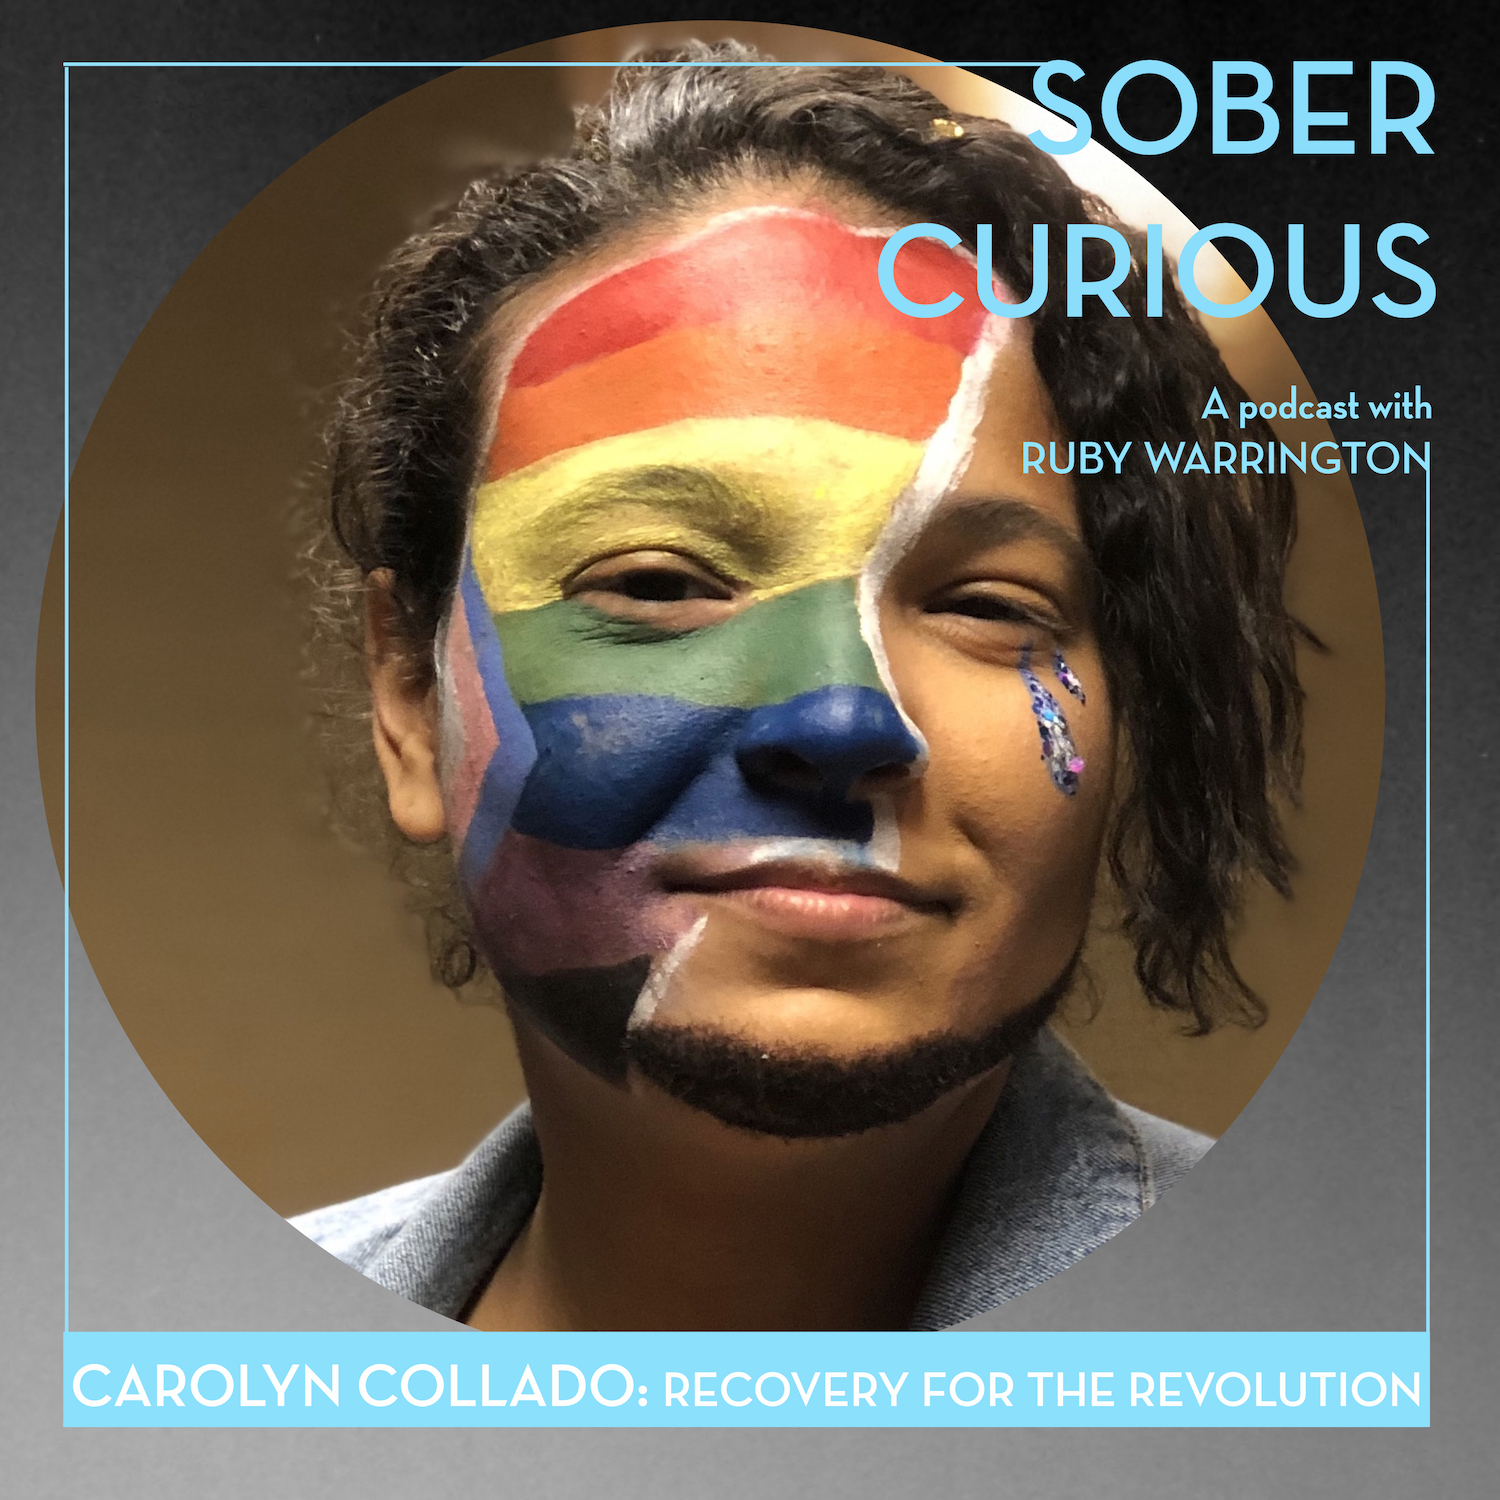 Sober Curious podcast Recovery for the Revolution Carolyn Collado